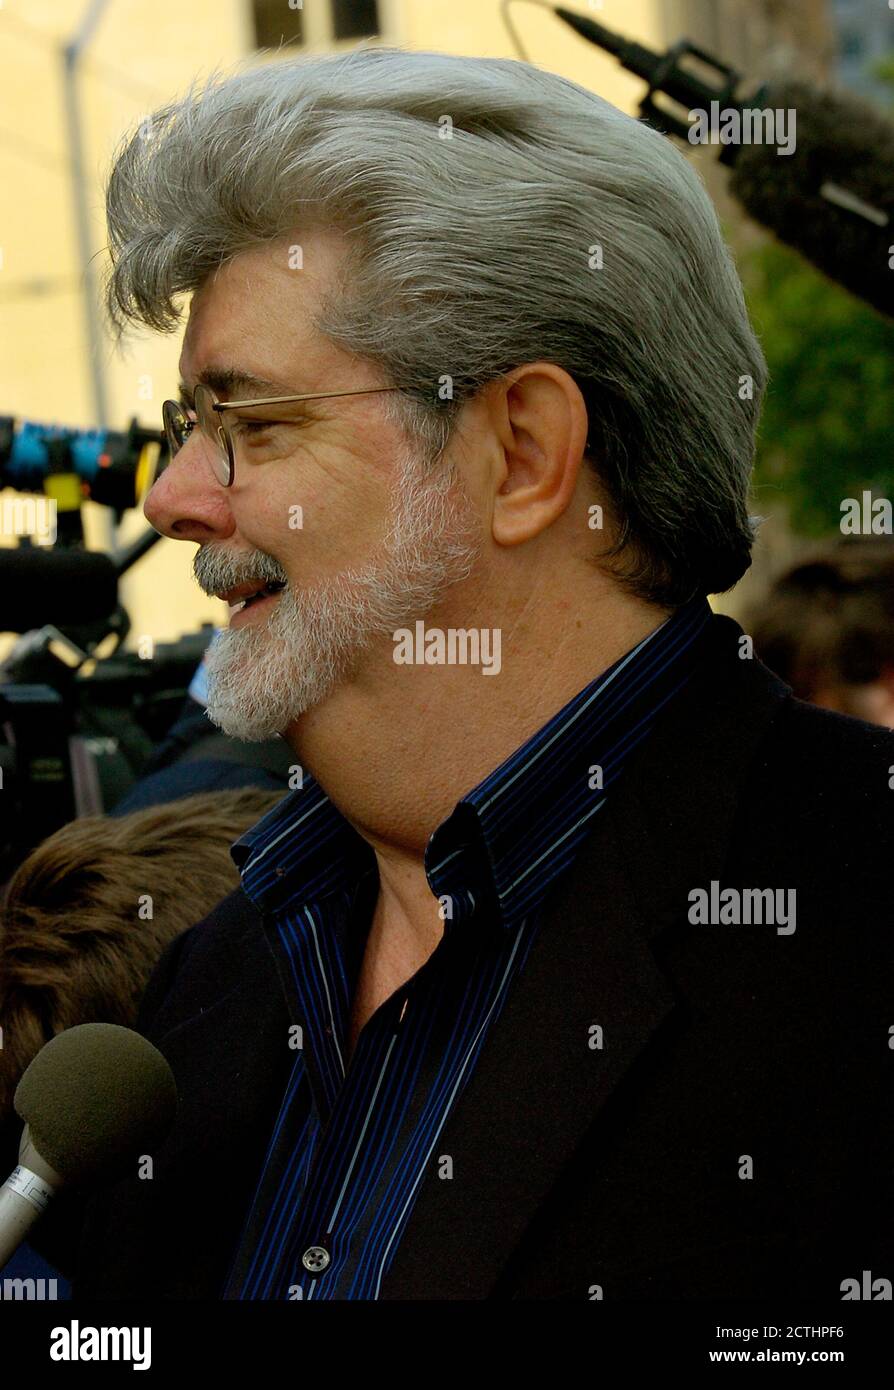 San Francisco, Calif. May 12. Star Wars creator George Lucas arrives at the benefit premiere of Star Wars, Episode III, Revenge of the Sith, at the Metreon in San Francisco. May 12, 2005. Credit: Stephen Dorian Miner/Mediapunch Stock Photo